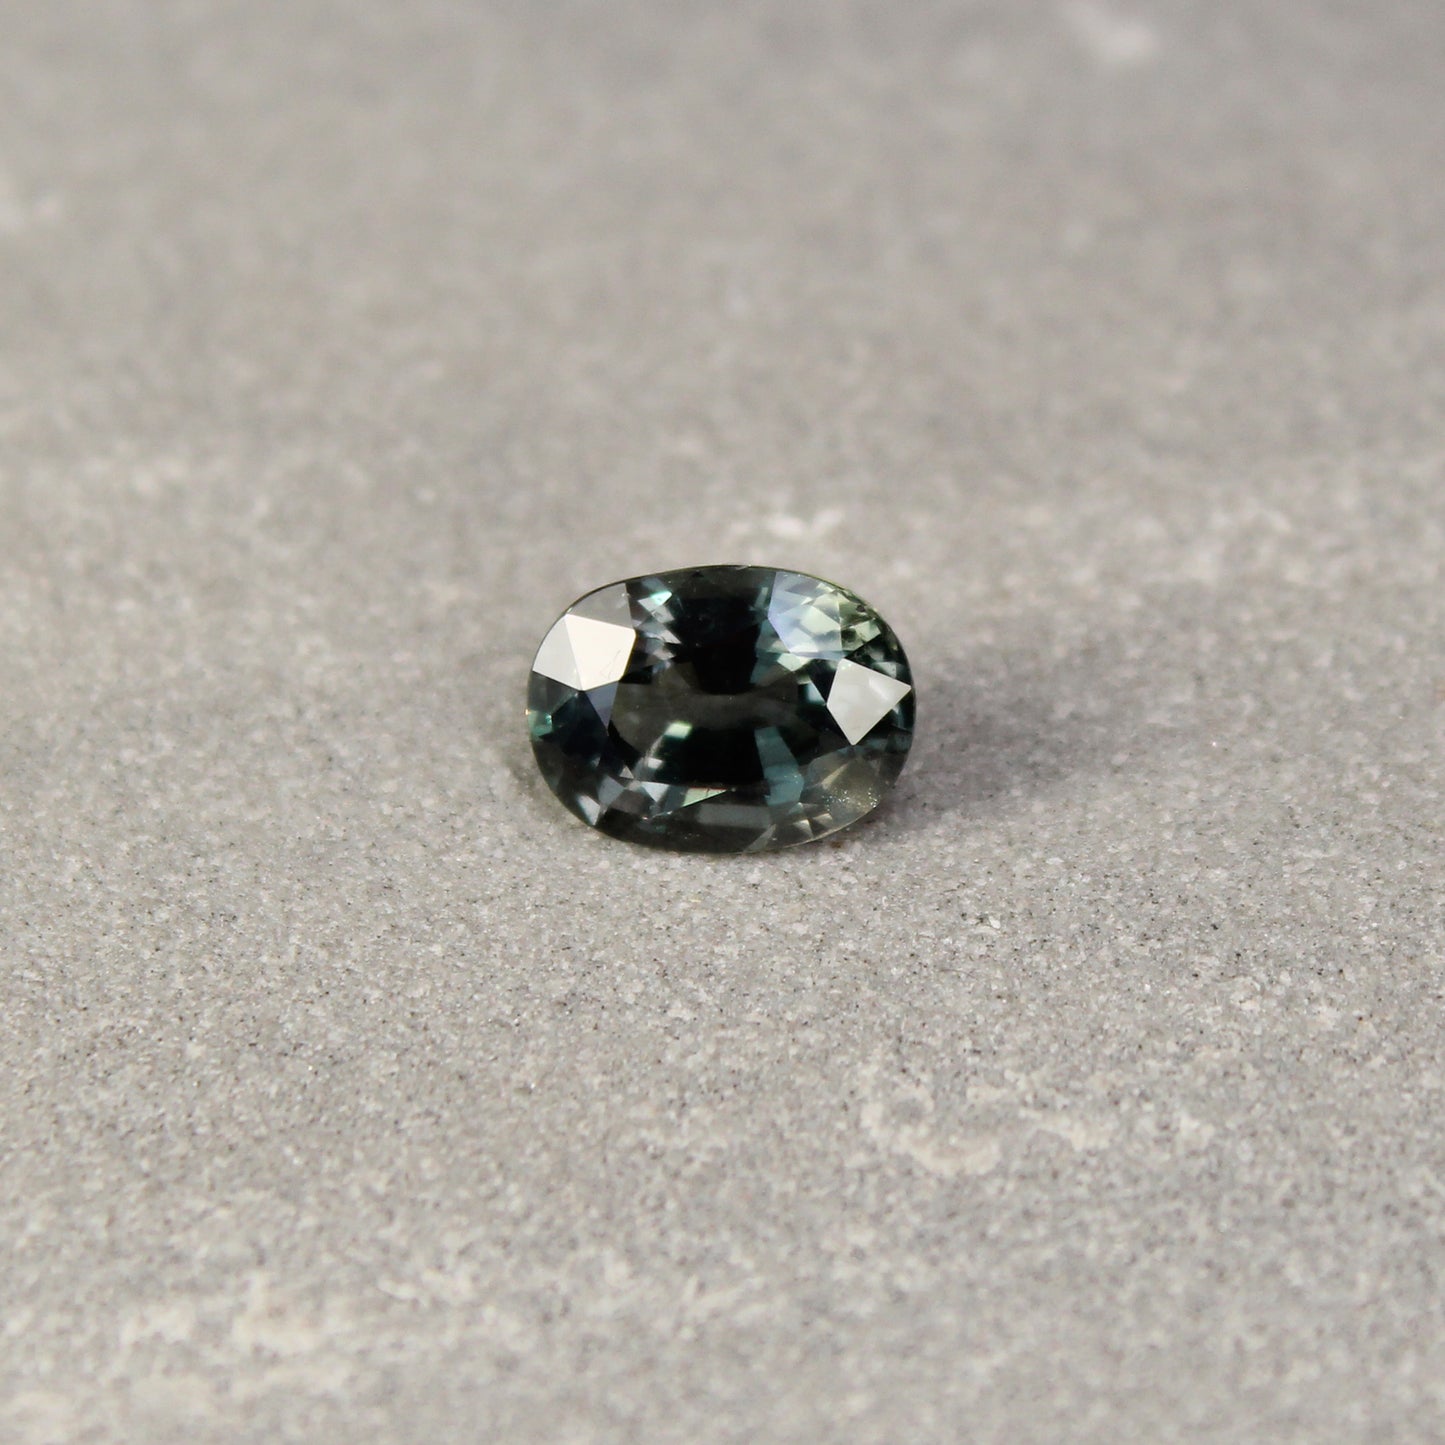 2.25ct Green, Oval Sapphire, Heated, East Africa - 8.40 x 6.30 x 4.65mm